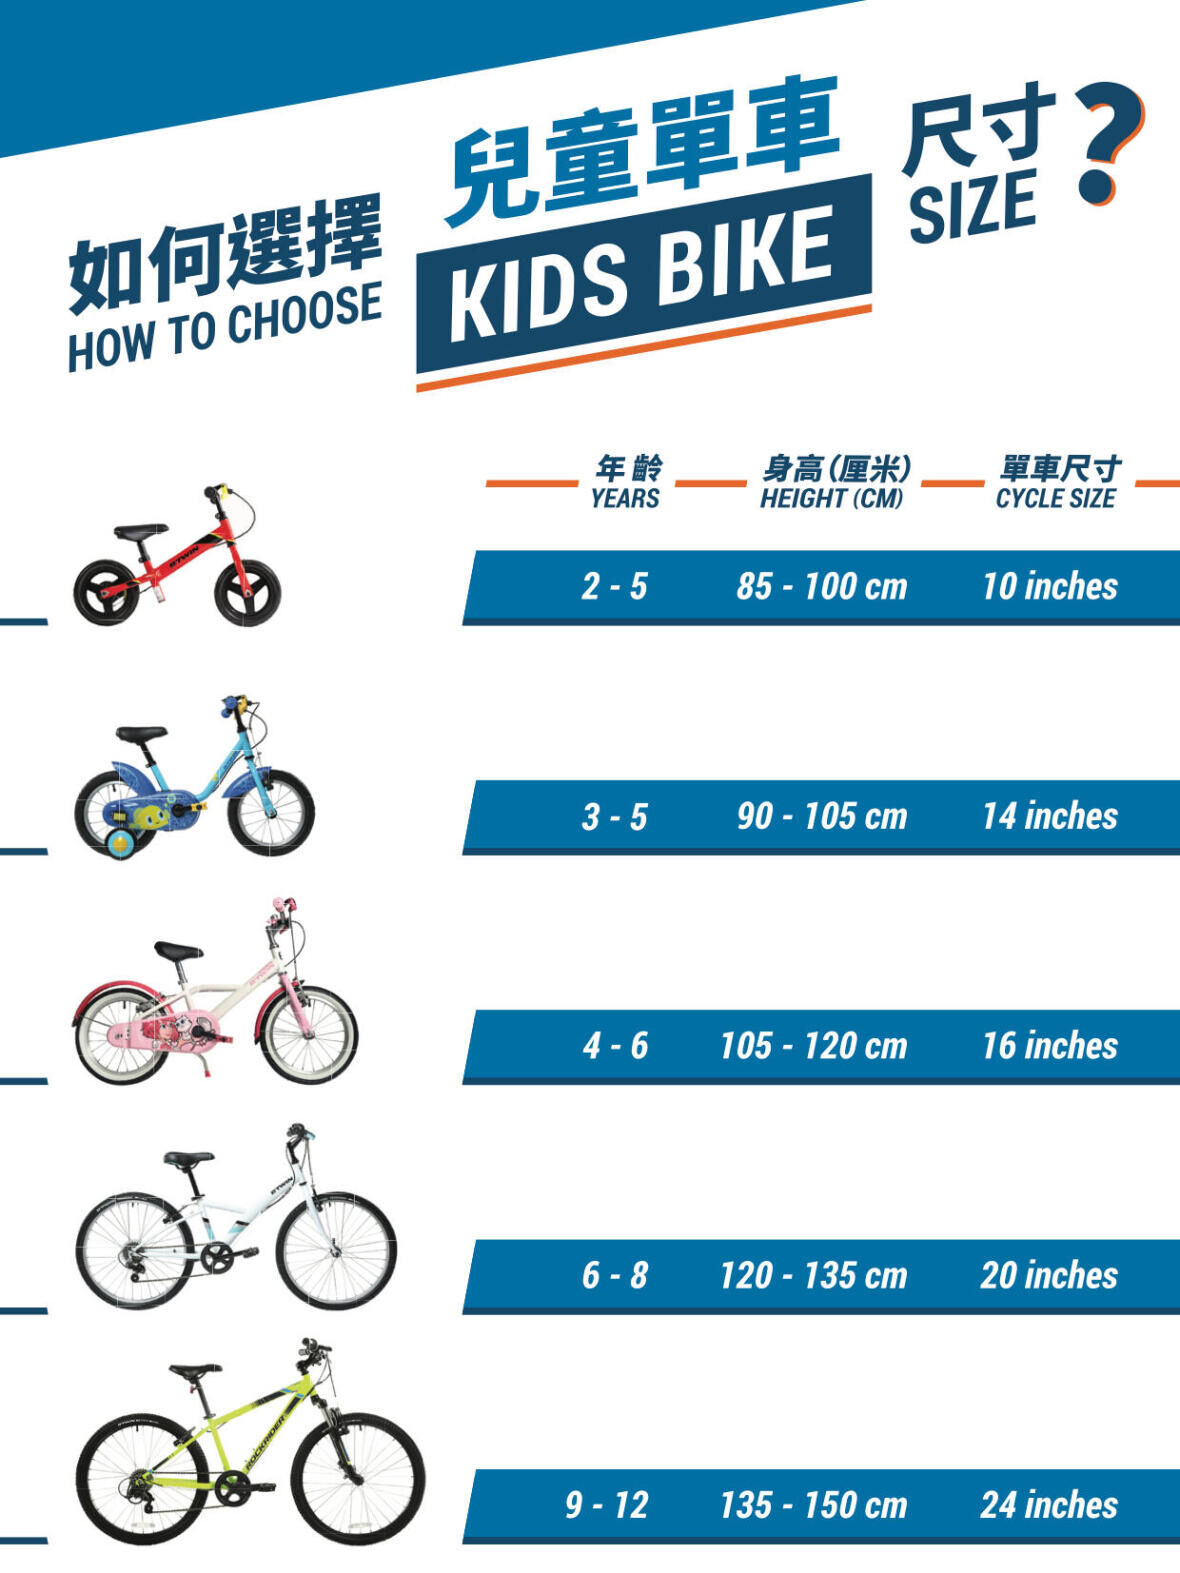 How to know which bike size is more suitable for kids